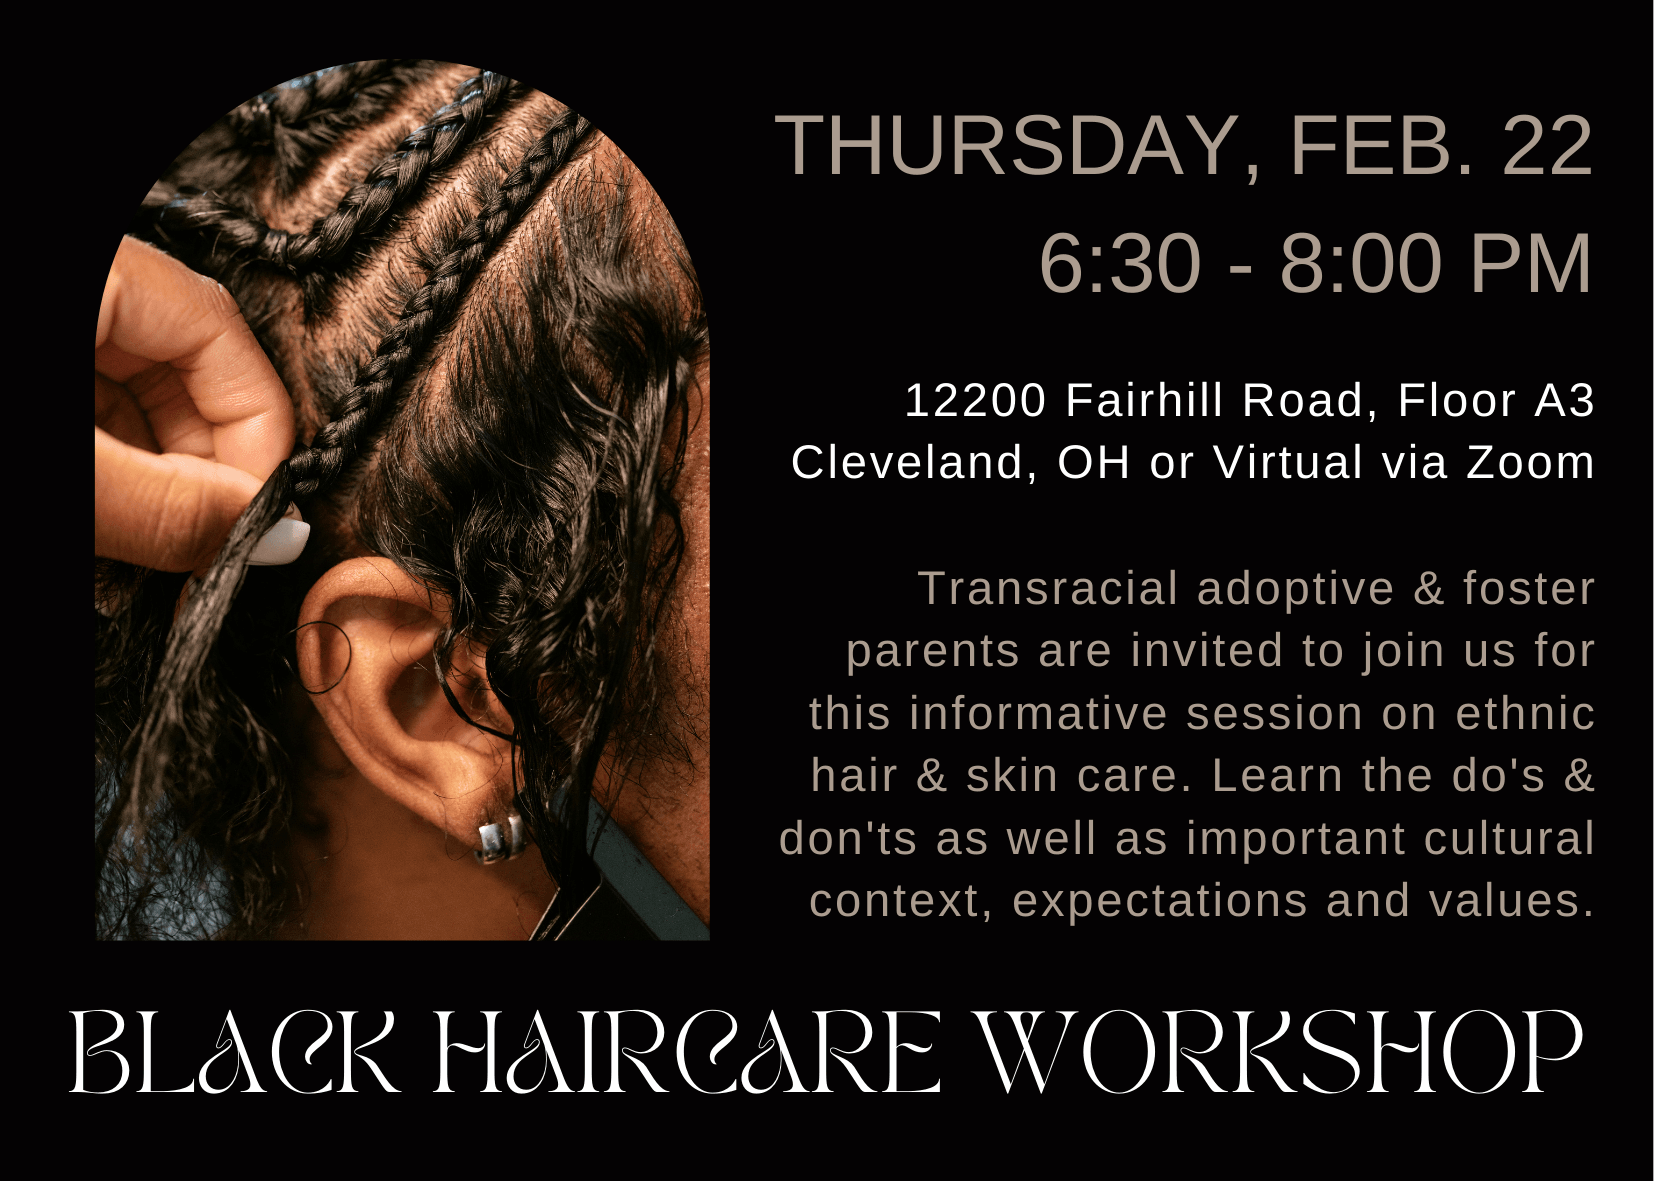 Join us for a Black Haircare Workshop